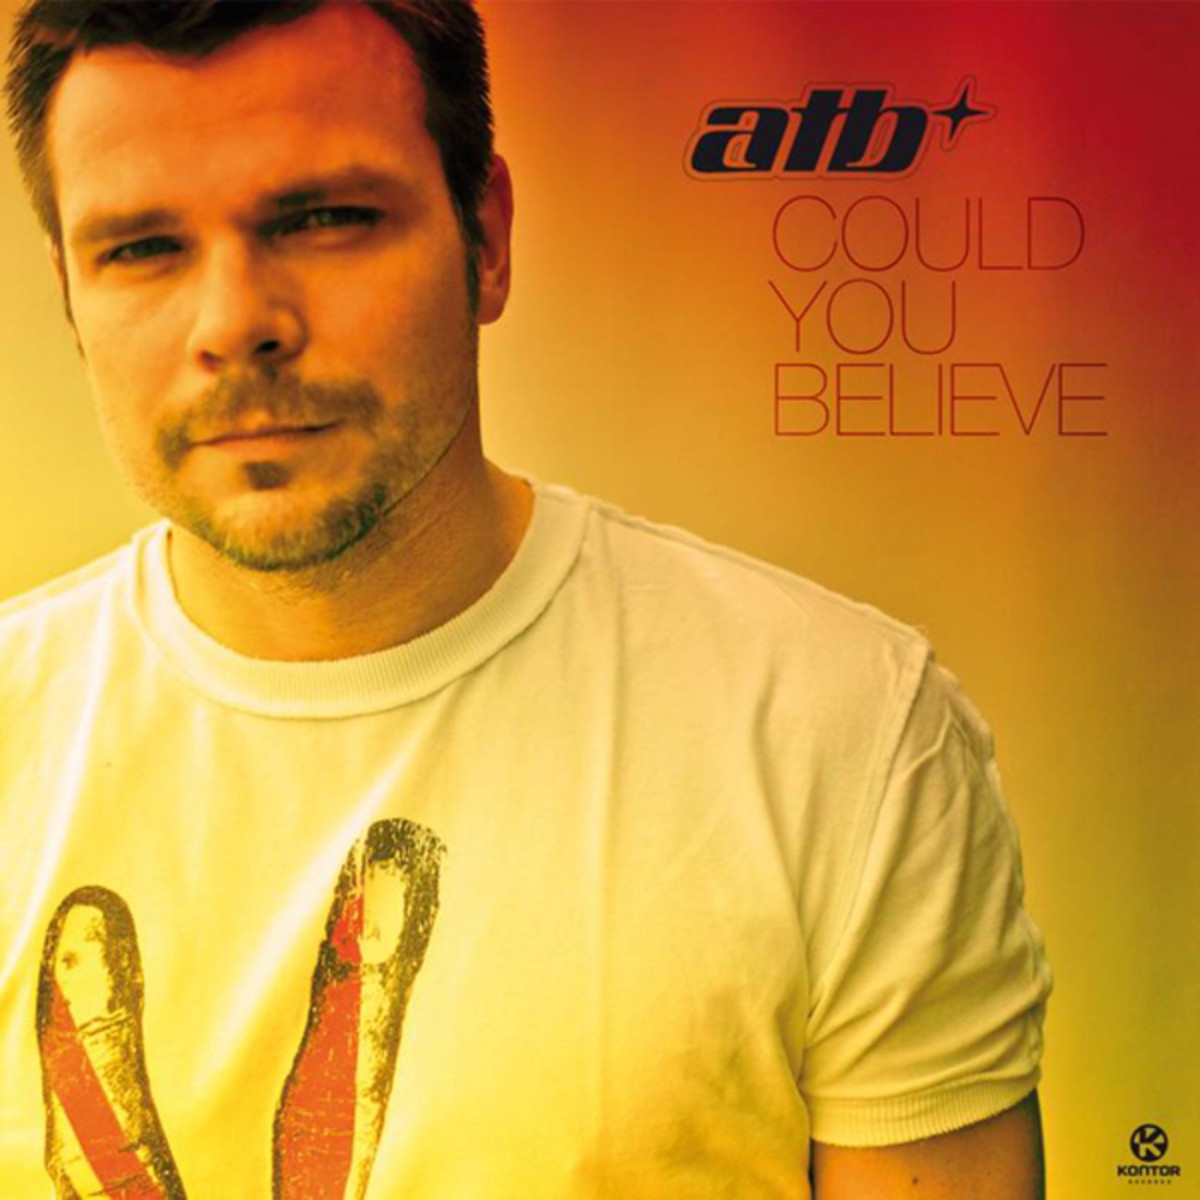 Could You Believe - Original Mix